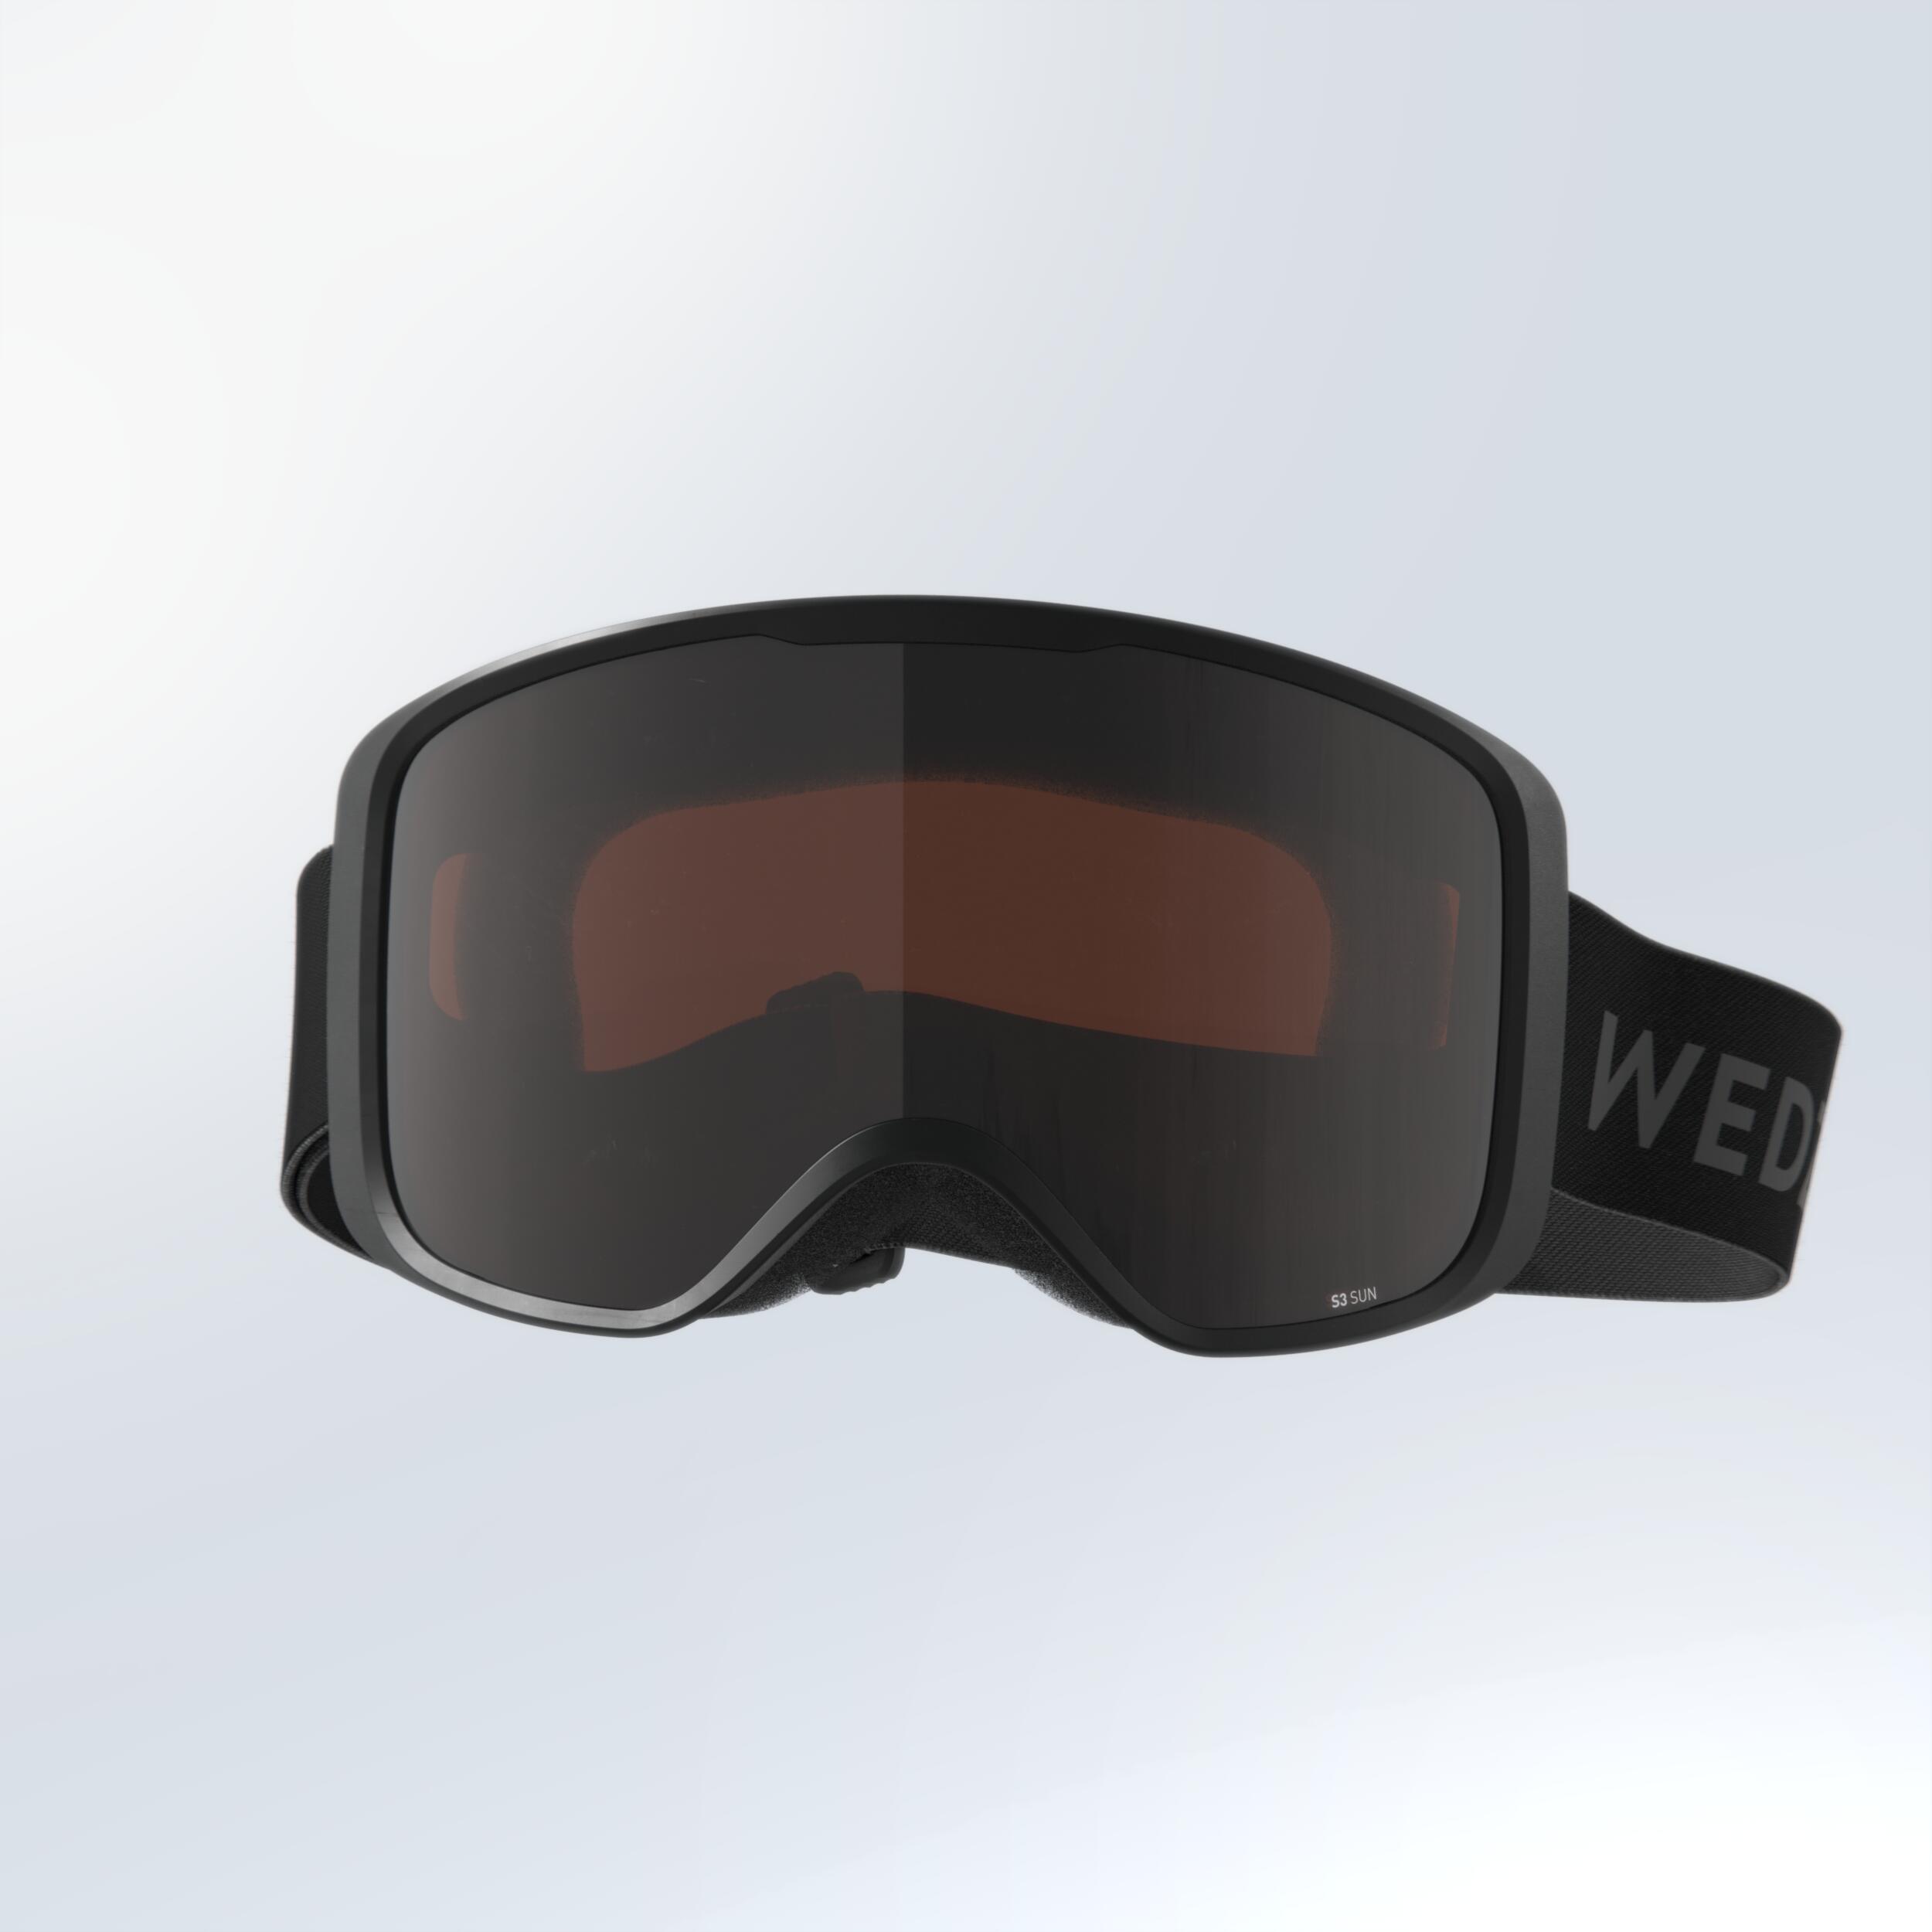 KIDS’ AND ADULTS’ SKIING AND SNOWBOARDING GOGGLES - G 100 S3 - BLACK 2/4